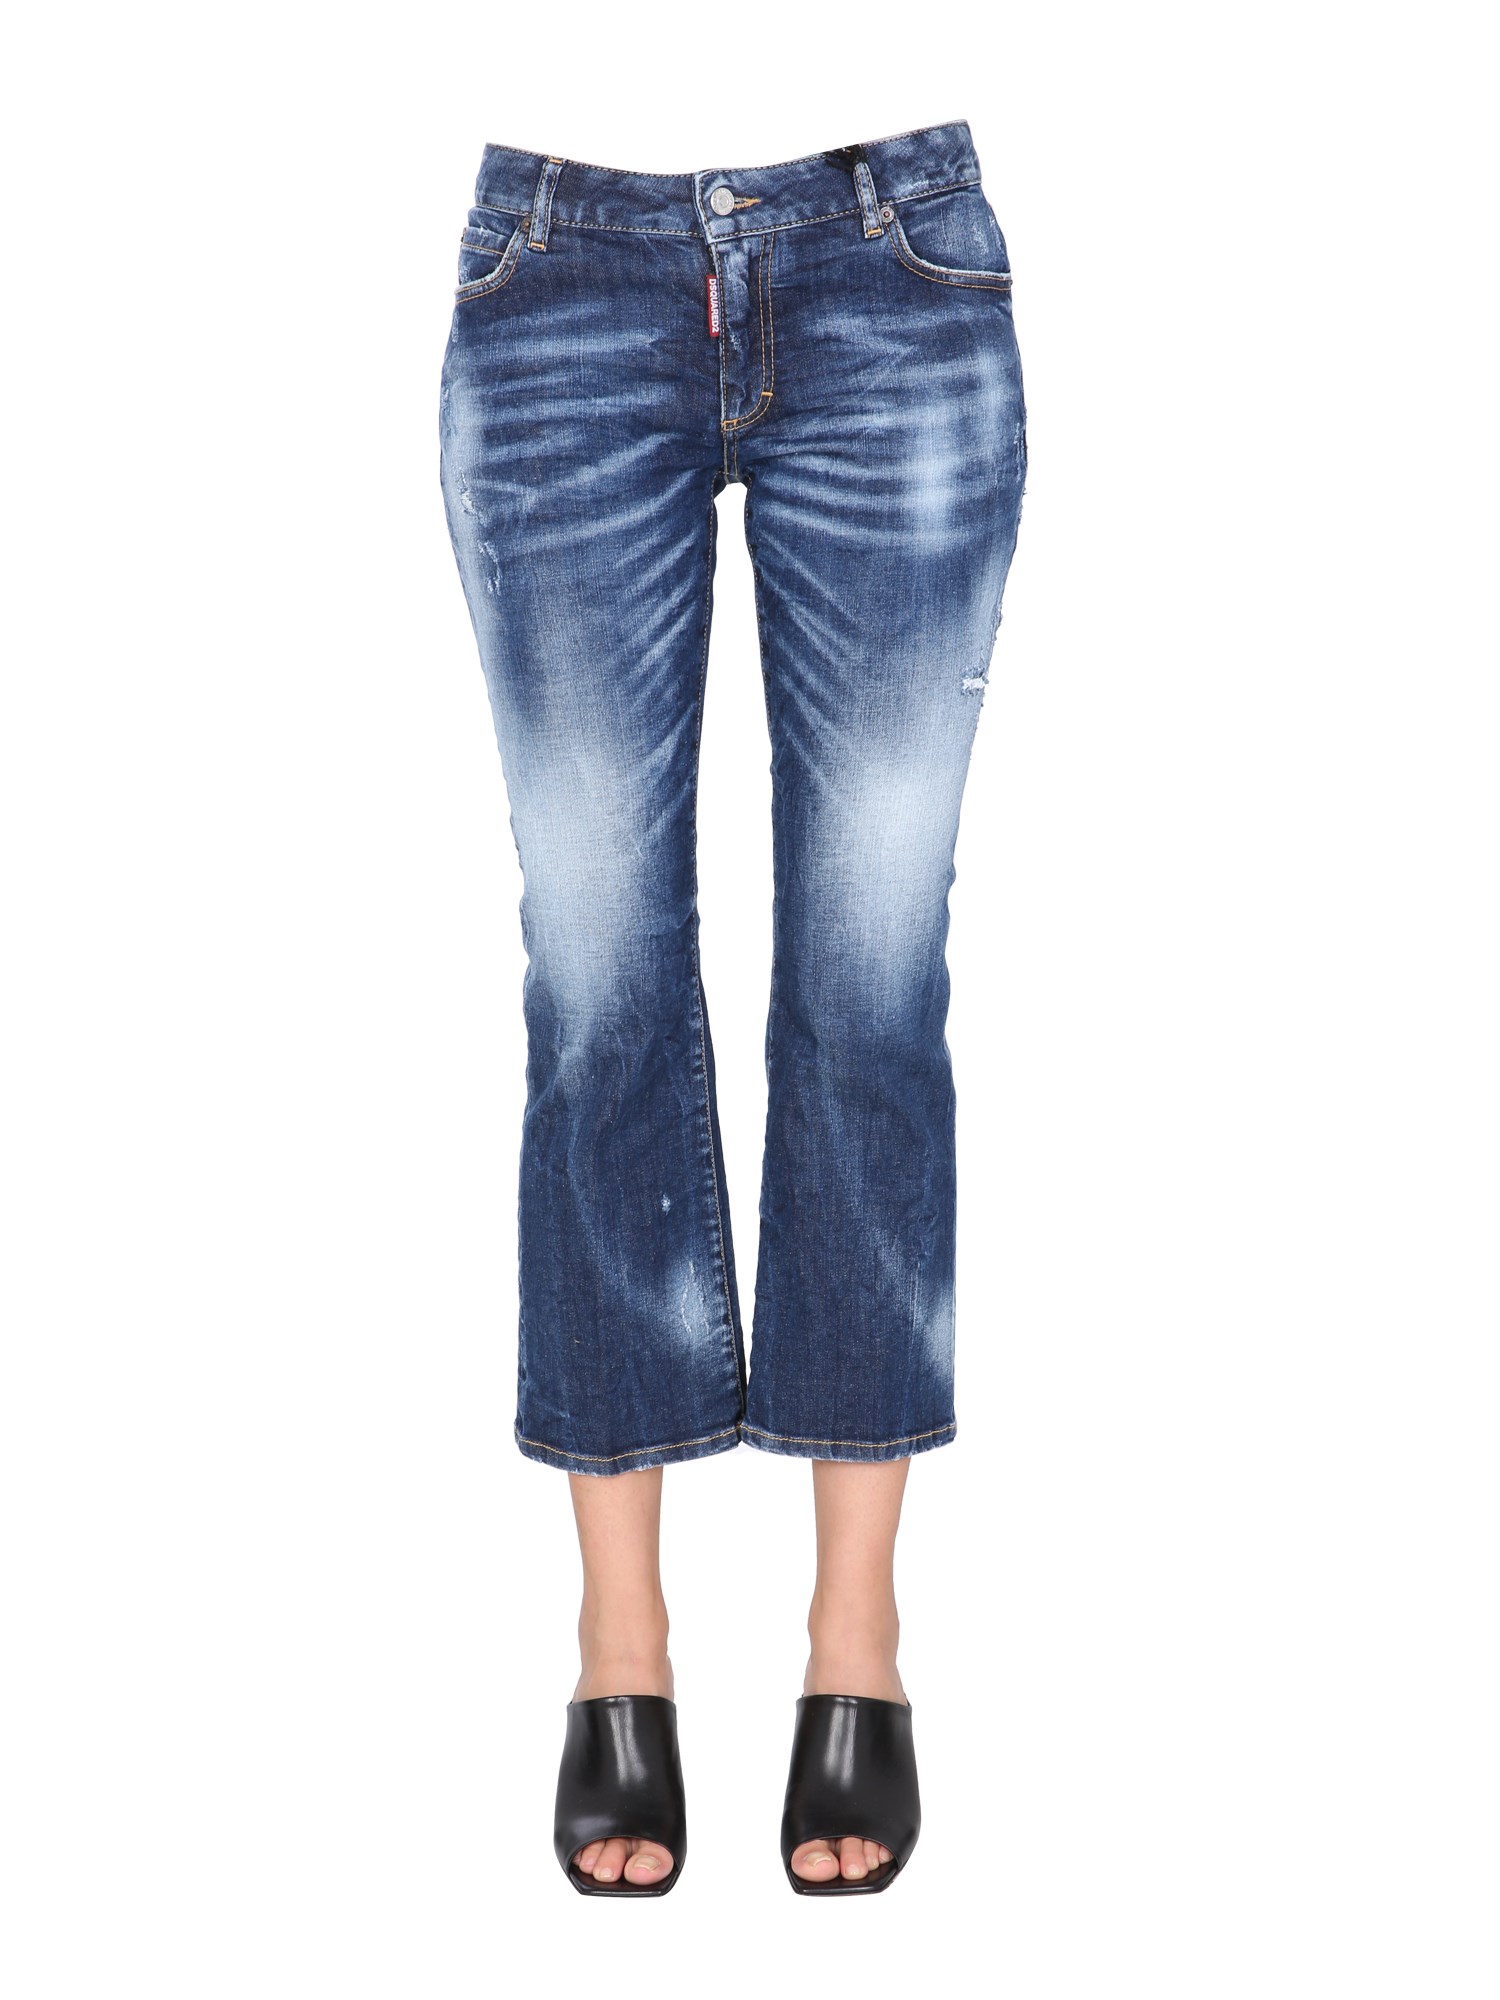 dsquared "bell bottom" jeans